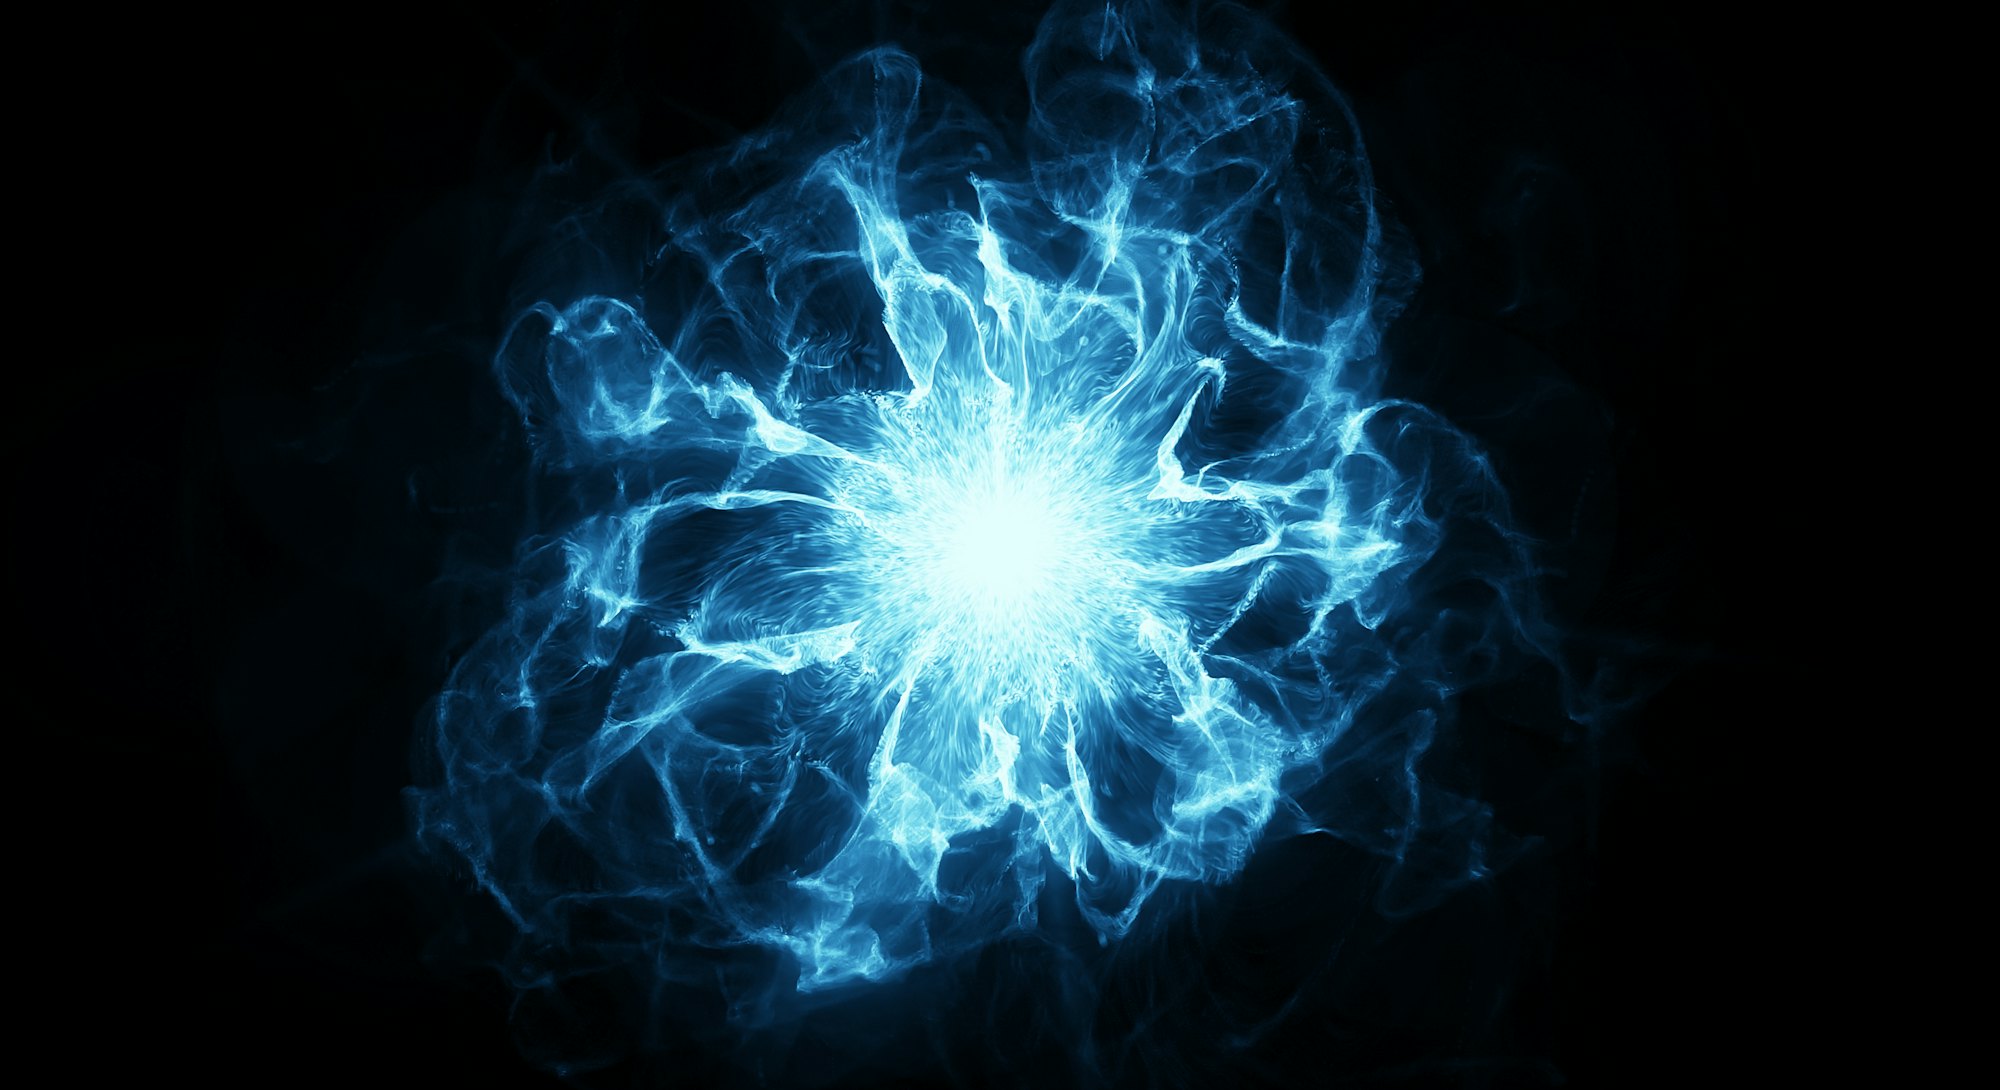 3d rendering. Abstract energy ball with fire. Look like a flower.